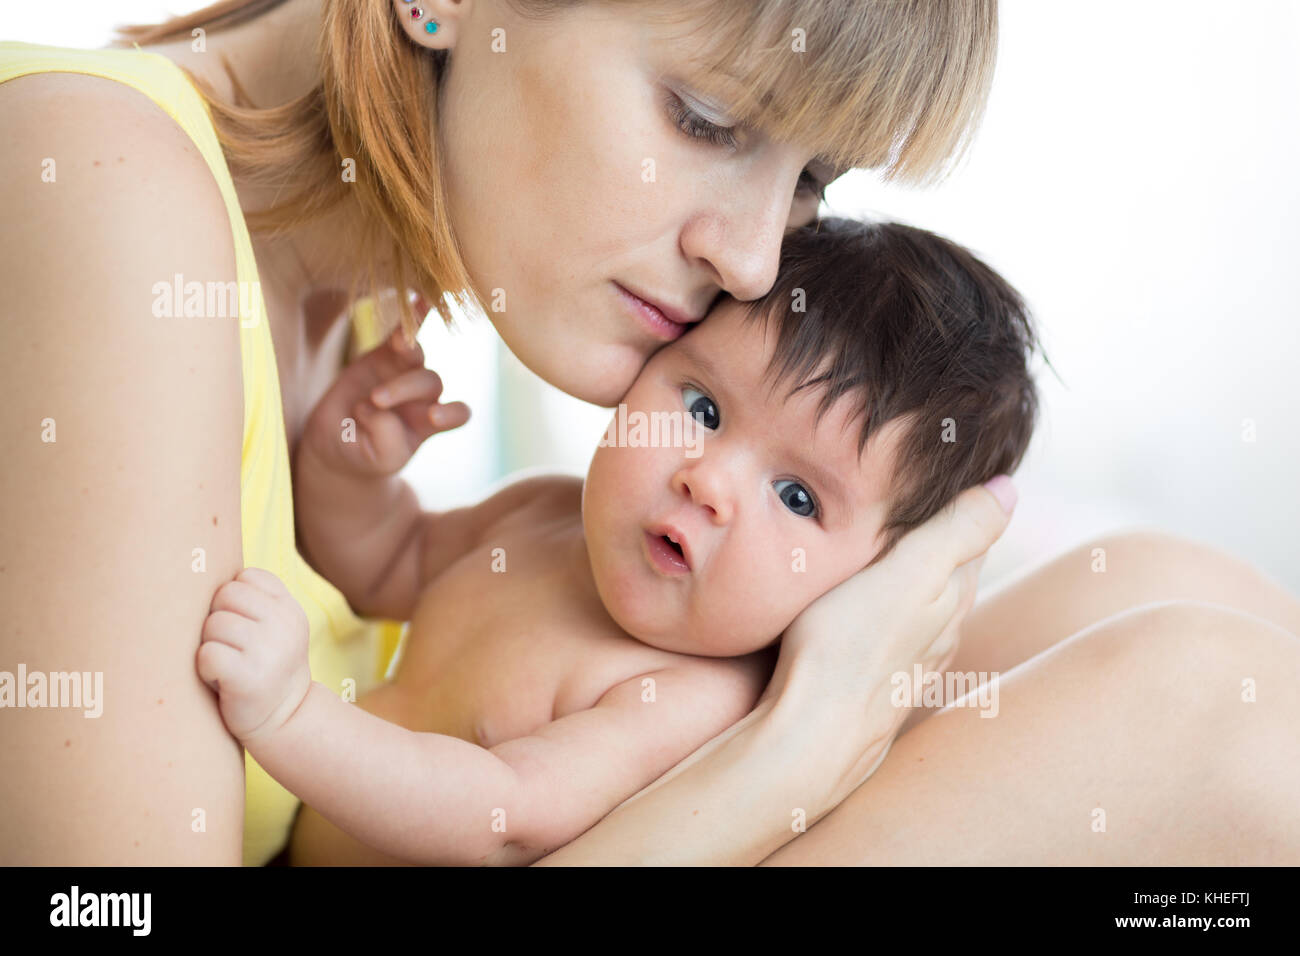 Happy mother with newborn baby at home. Family, child and parenthood concept. Stock Photo